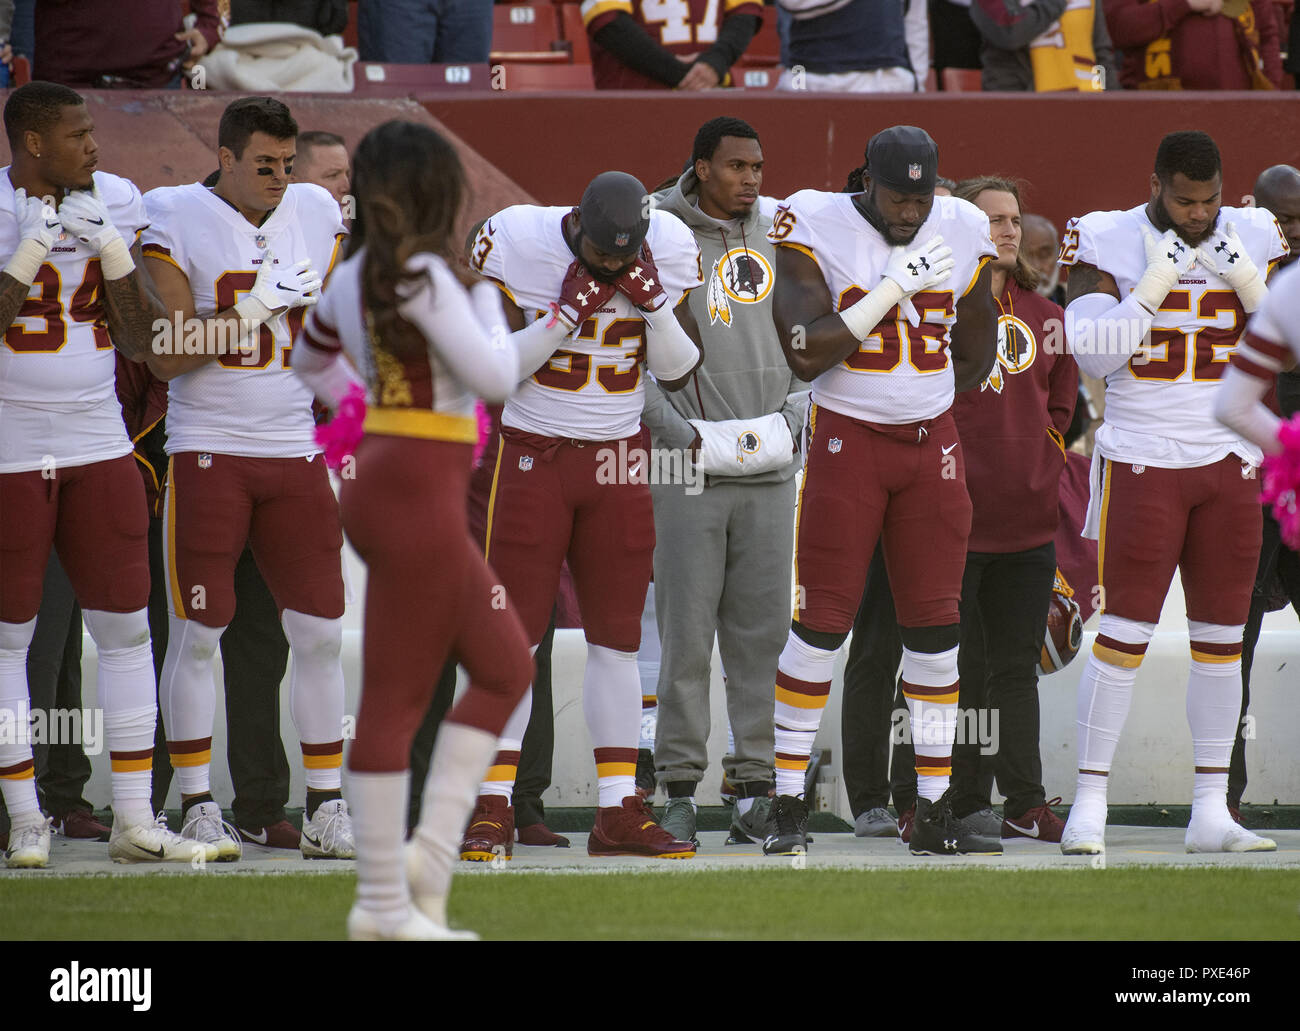 Landover, Maryland, USA. 21st Oct, 2018. Washington Redskins linebacker Preston Smith (94), linebacker Ryan Kerrigan (91), linebacker Zach Brown (53), linebacker Pernell McPhee (96) and linebacker Ryan Anderson (52) stand as the National Anthem is sung prior to the game against the Dallas Cowboys at FedEx Field in Landover, Maryland on Sunday, October 21, 2018 Credit: Ron Sachs/CNP/ZUMA Wire/Alamy Live News Stock Photo